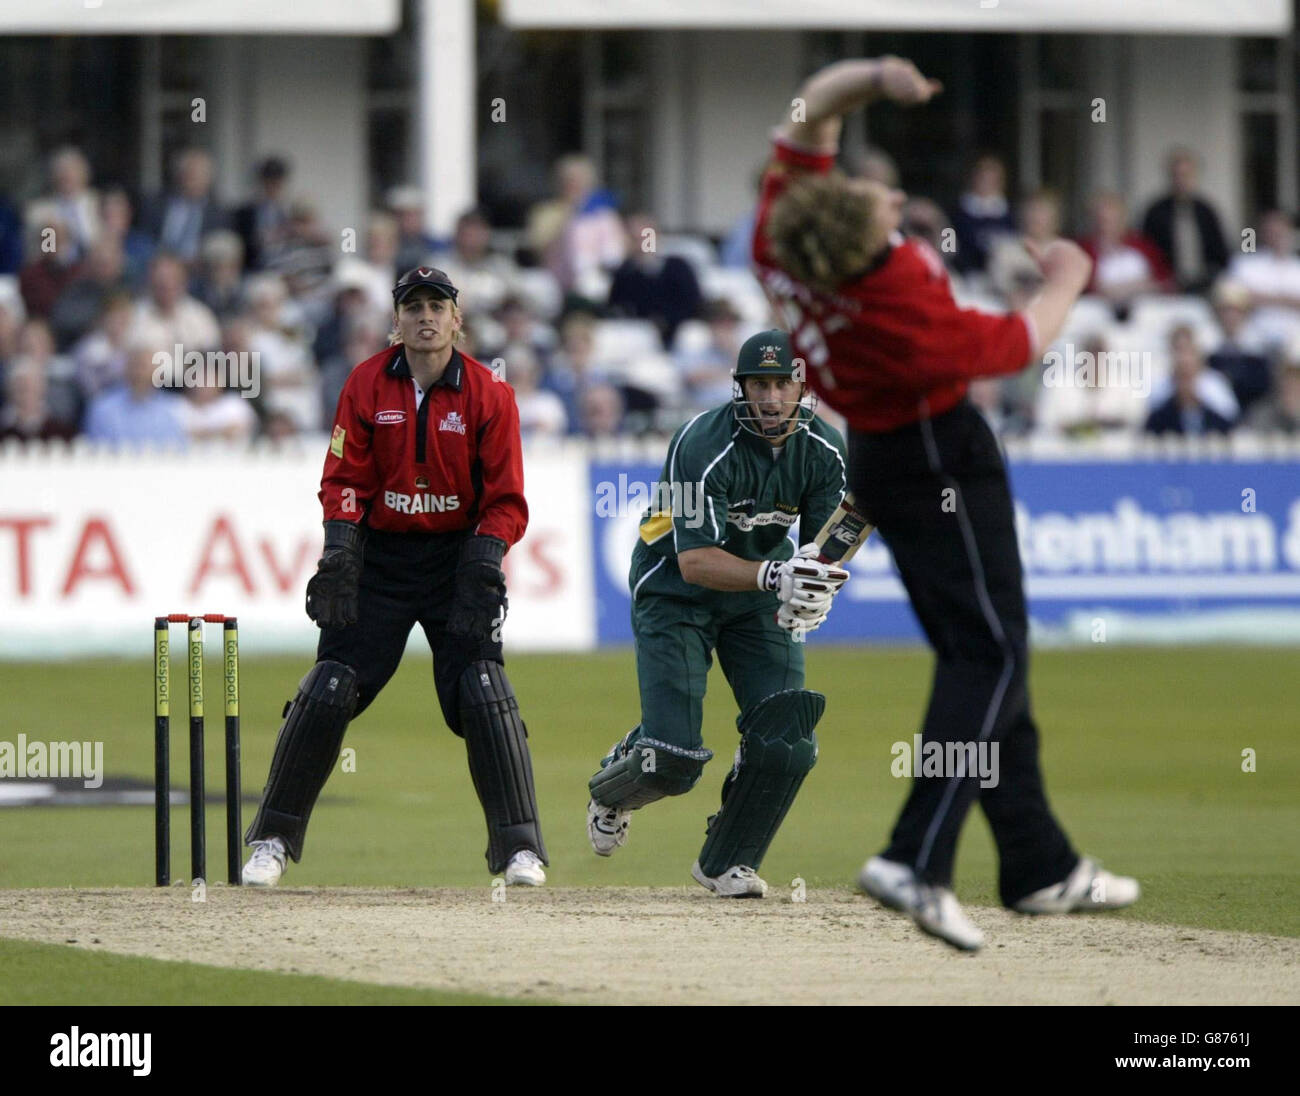 Nottinghamshire's David Hussey scores runs off Glamorgan's bowler Robert Croft watched by wicketkeeper Mark Wallace. Stock Photo